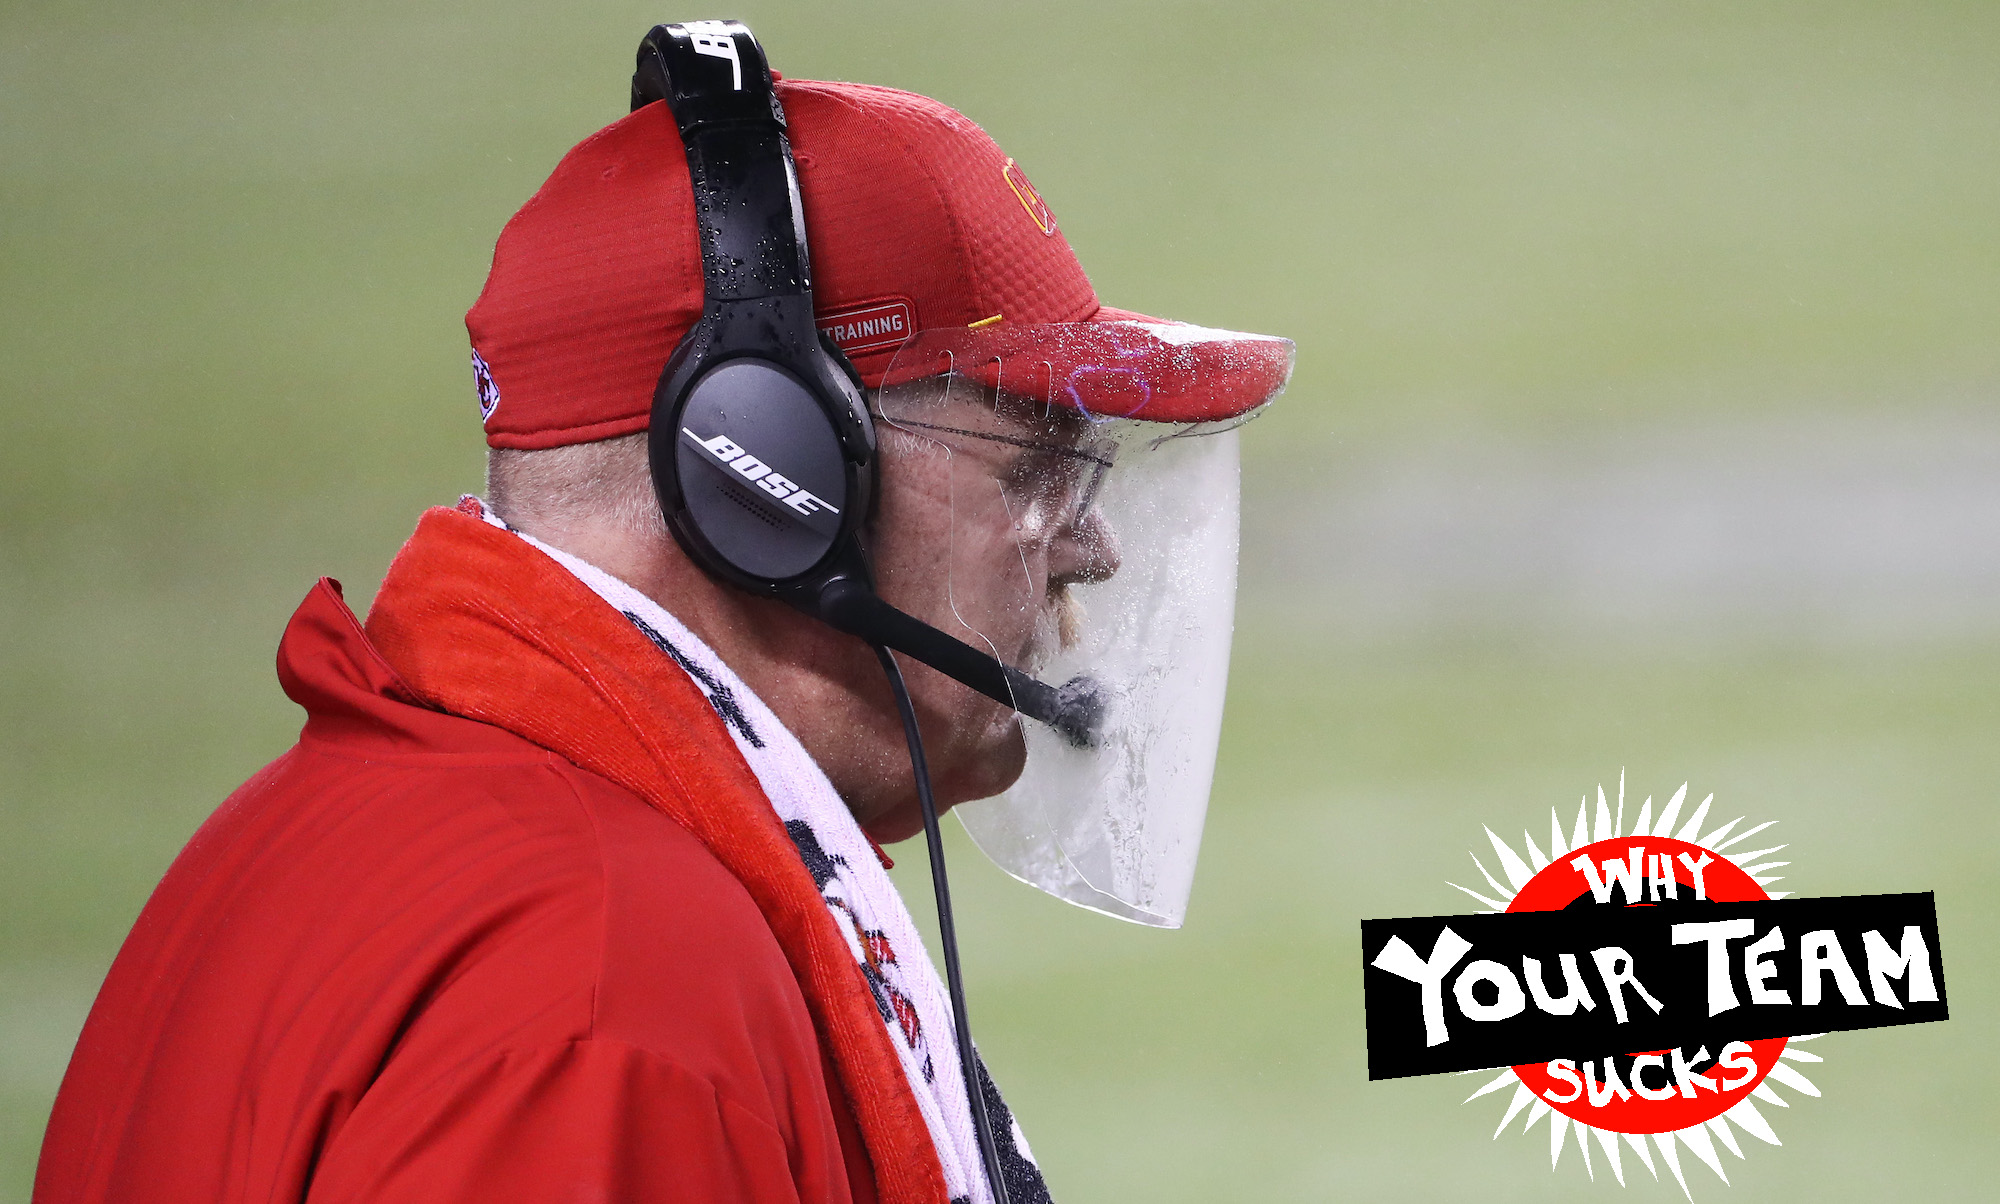 KANSAS CITY, MISSOURI - SEPTEMBER 10: Head coach Andy Reid of the Kansas City Chiefs looks on through a plastic shield during the fourth quarter against the Houston Texans at Arrowhead Stadium on September 10, 2020 in Kansas City, Missouri. (Photo by Jamie Squire/Getty Images)